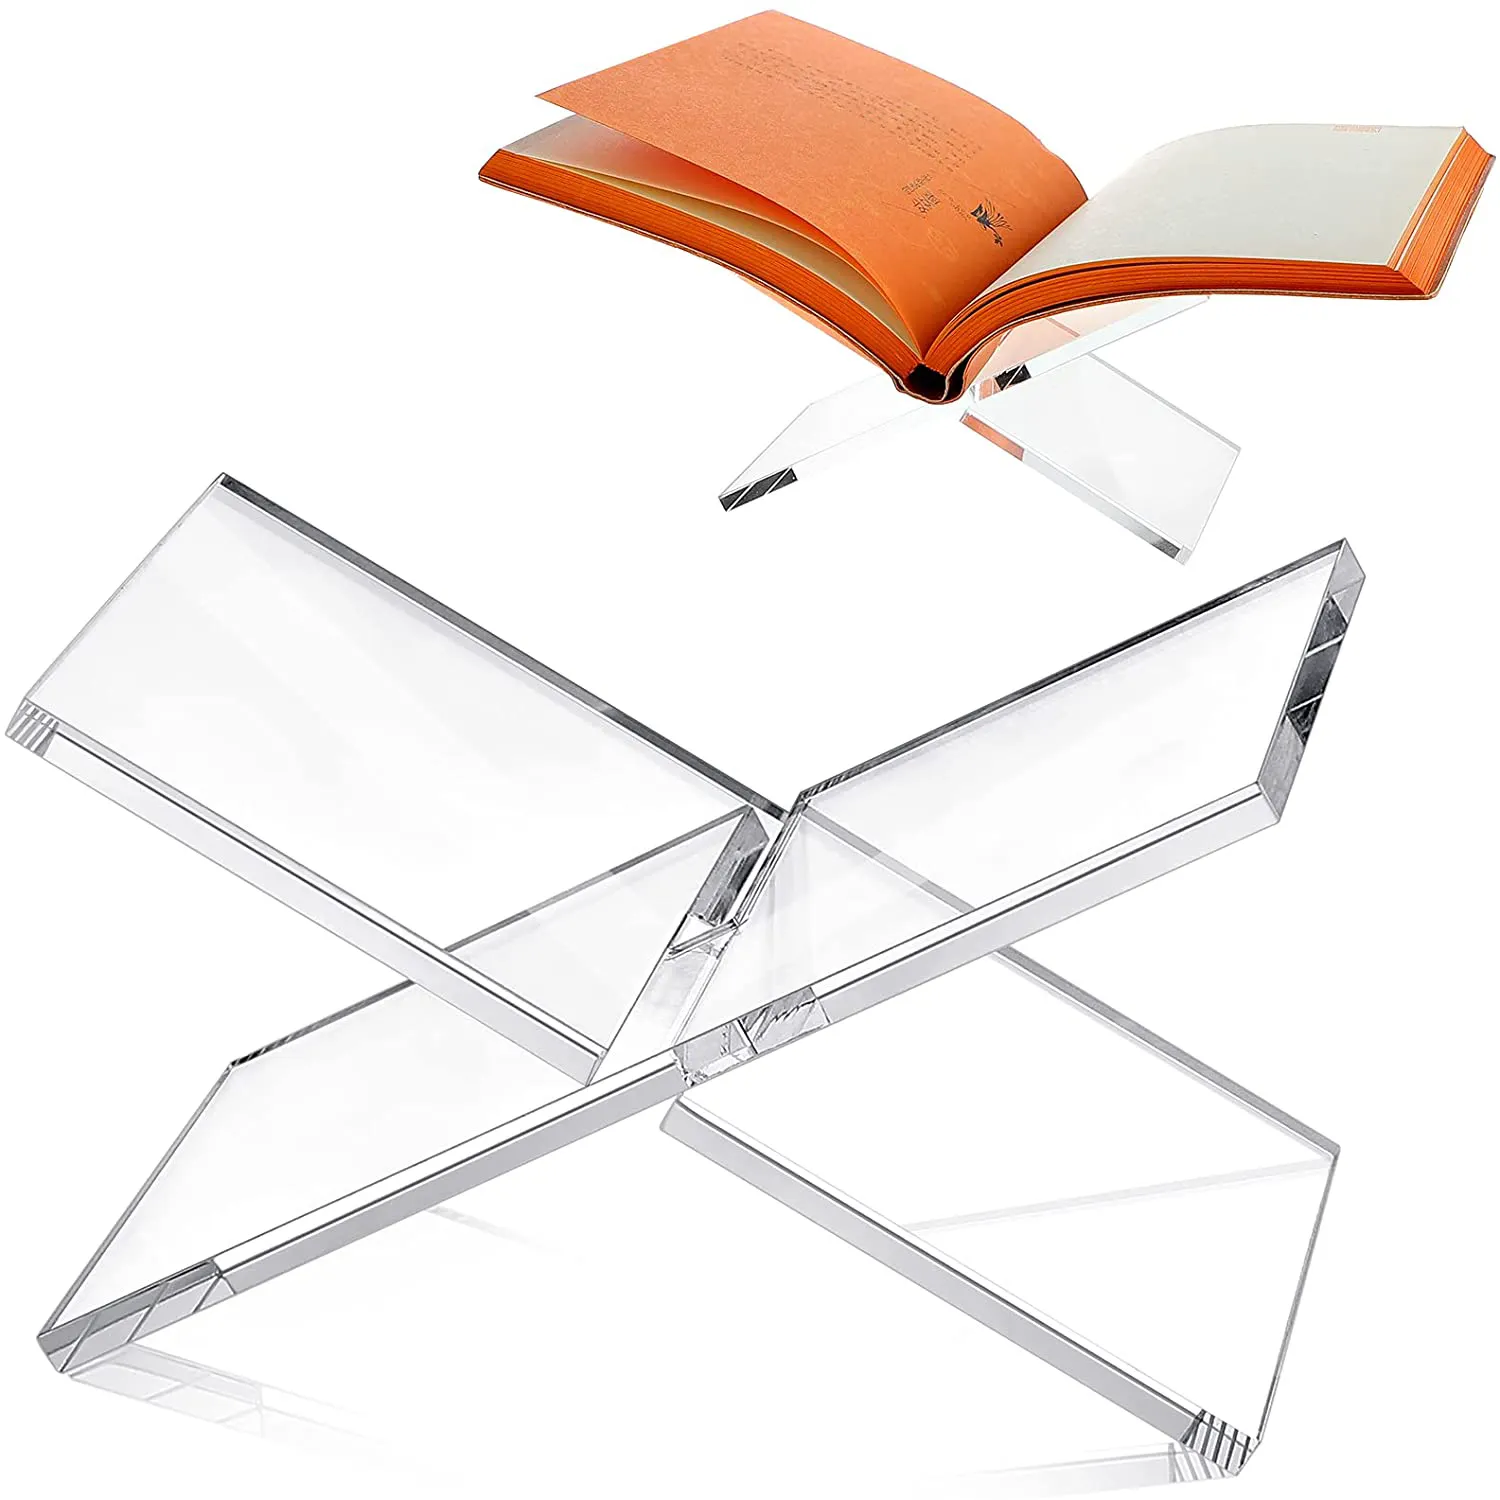 Custom Portable Clear Book Holder Acrylic Book Stand, Reading Stand for Desk Open and Closed Books Display